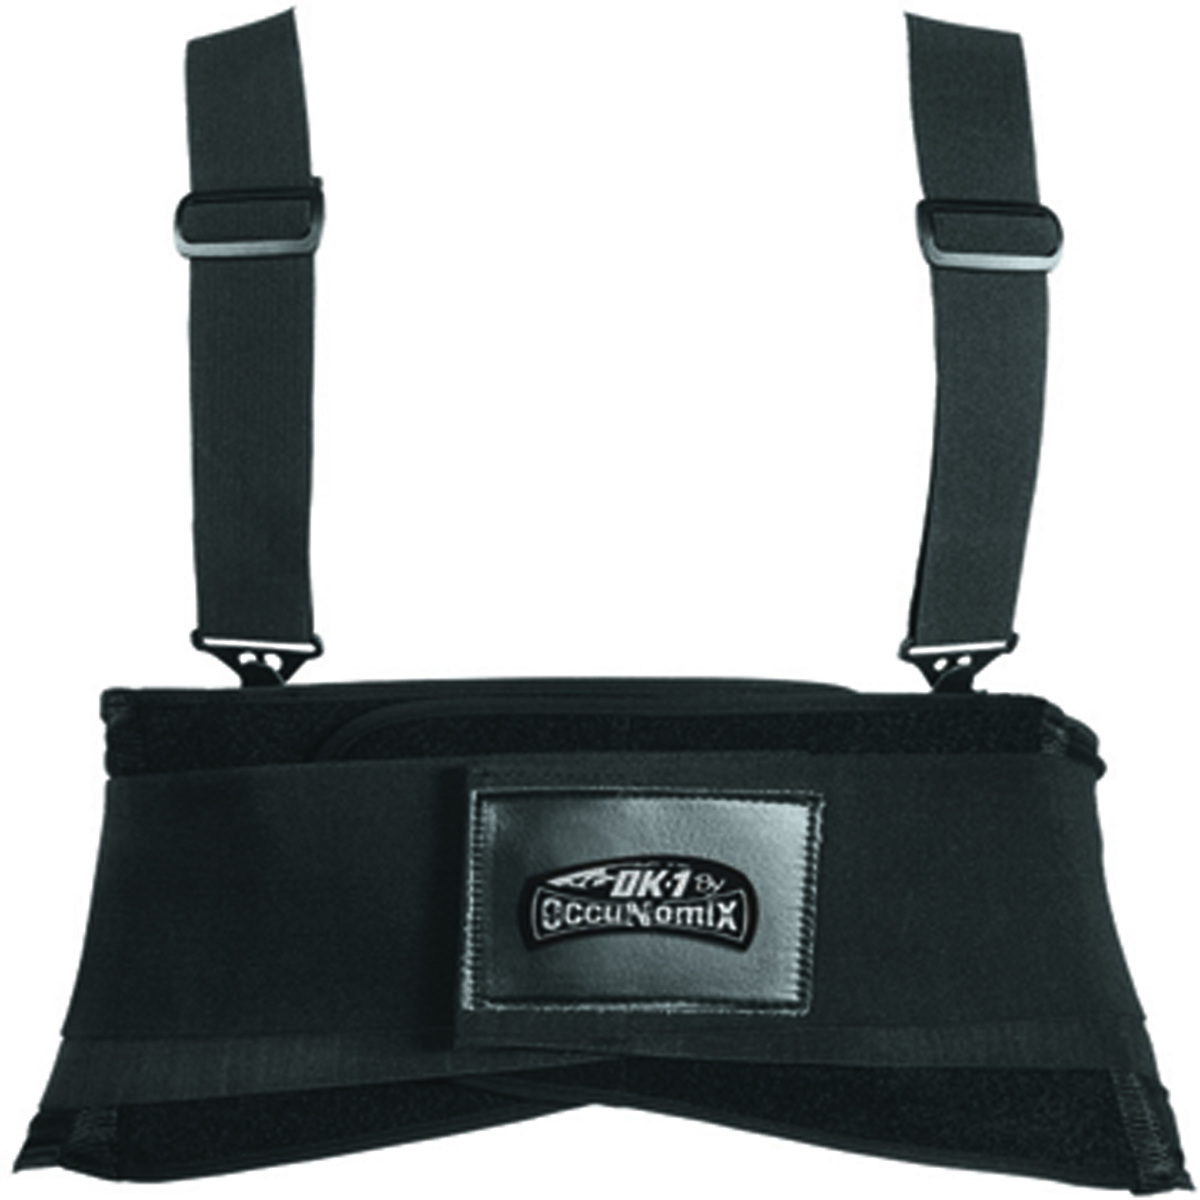 OccuNomix Small Black OK-1 Polyester/Rubber Back Support